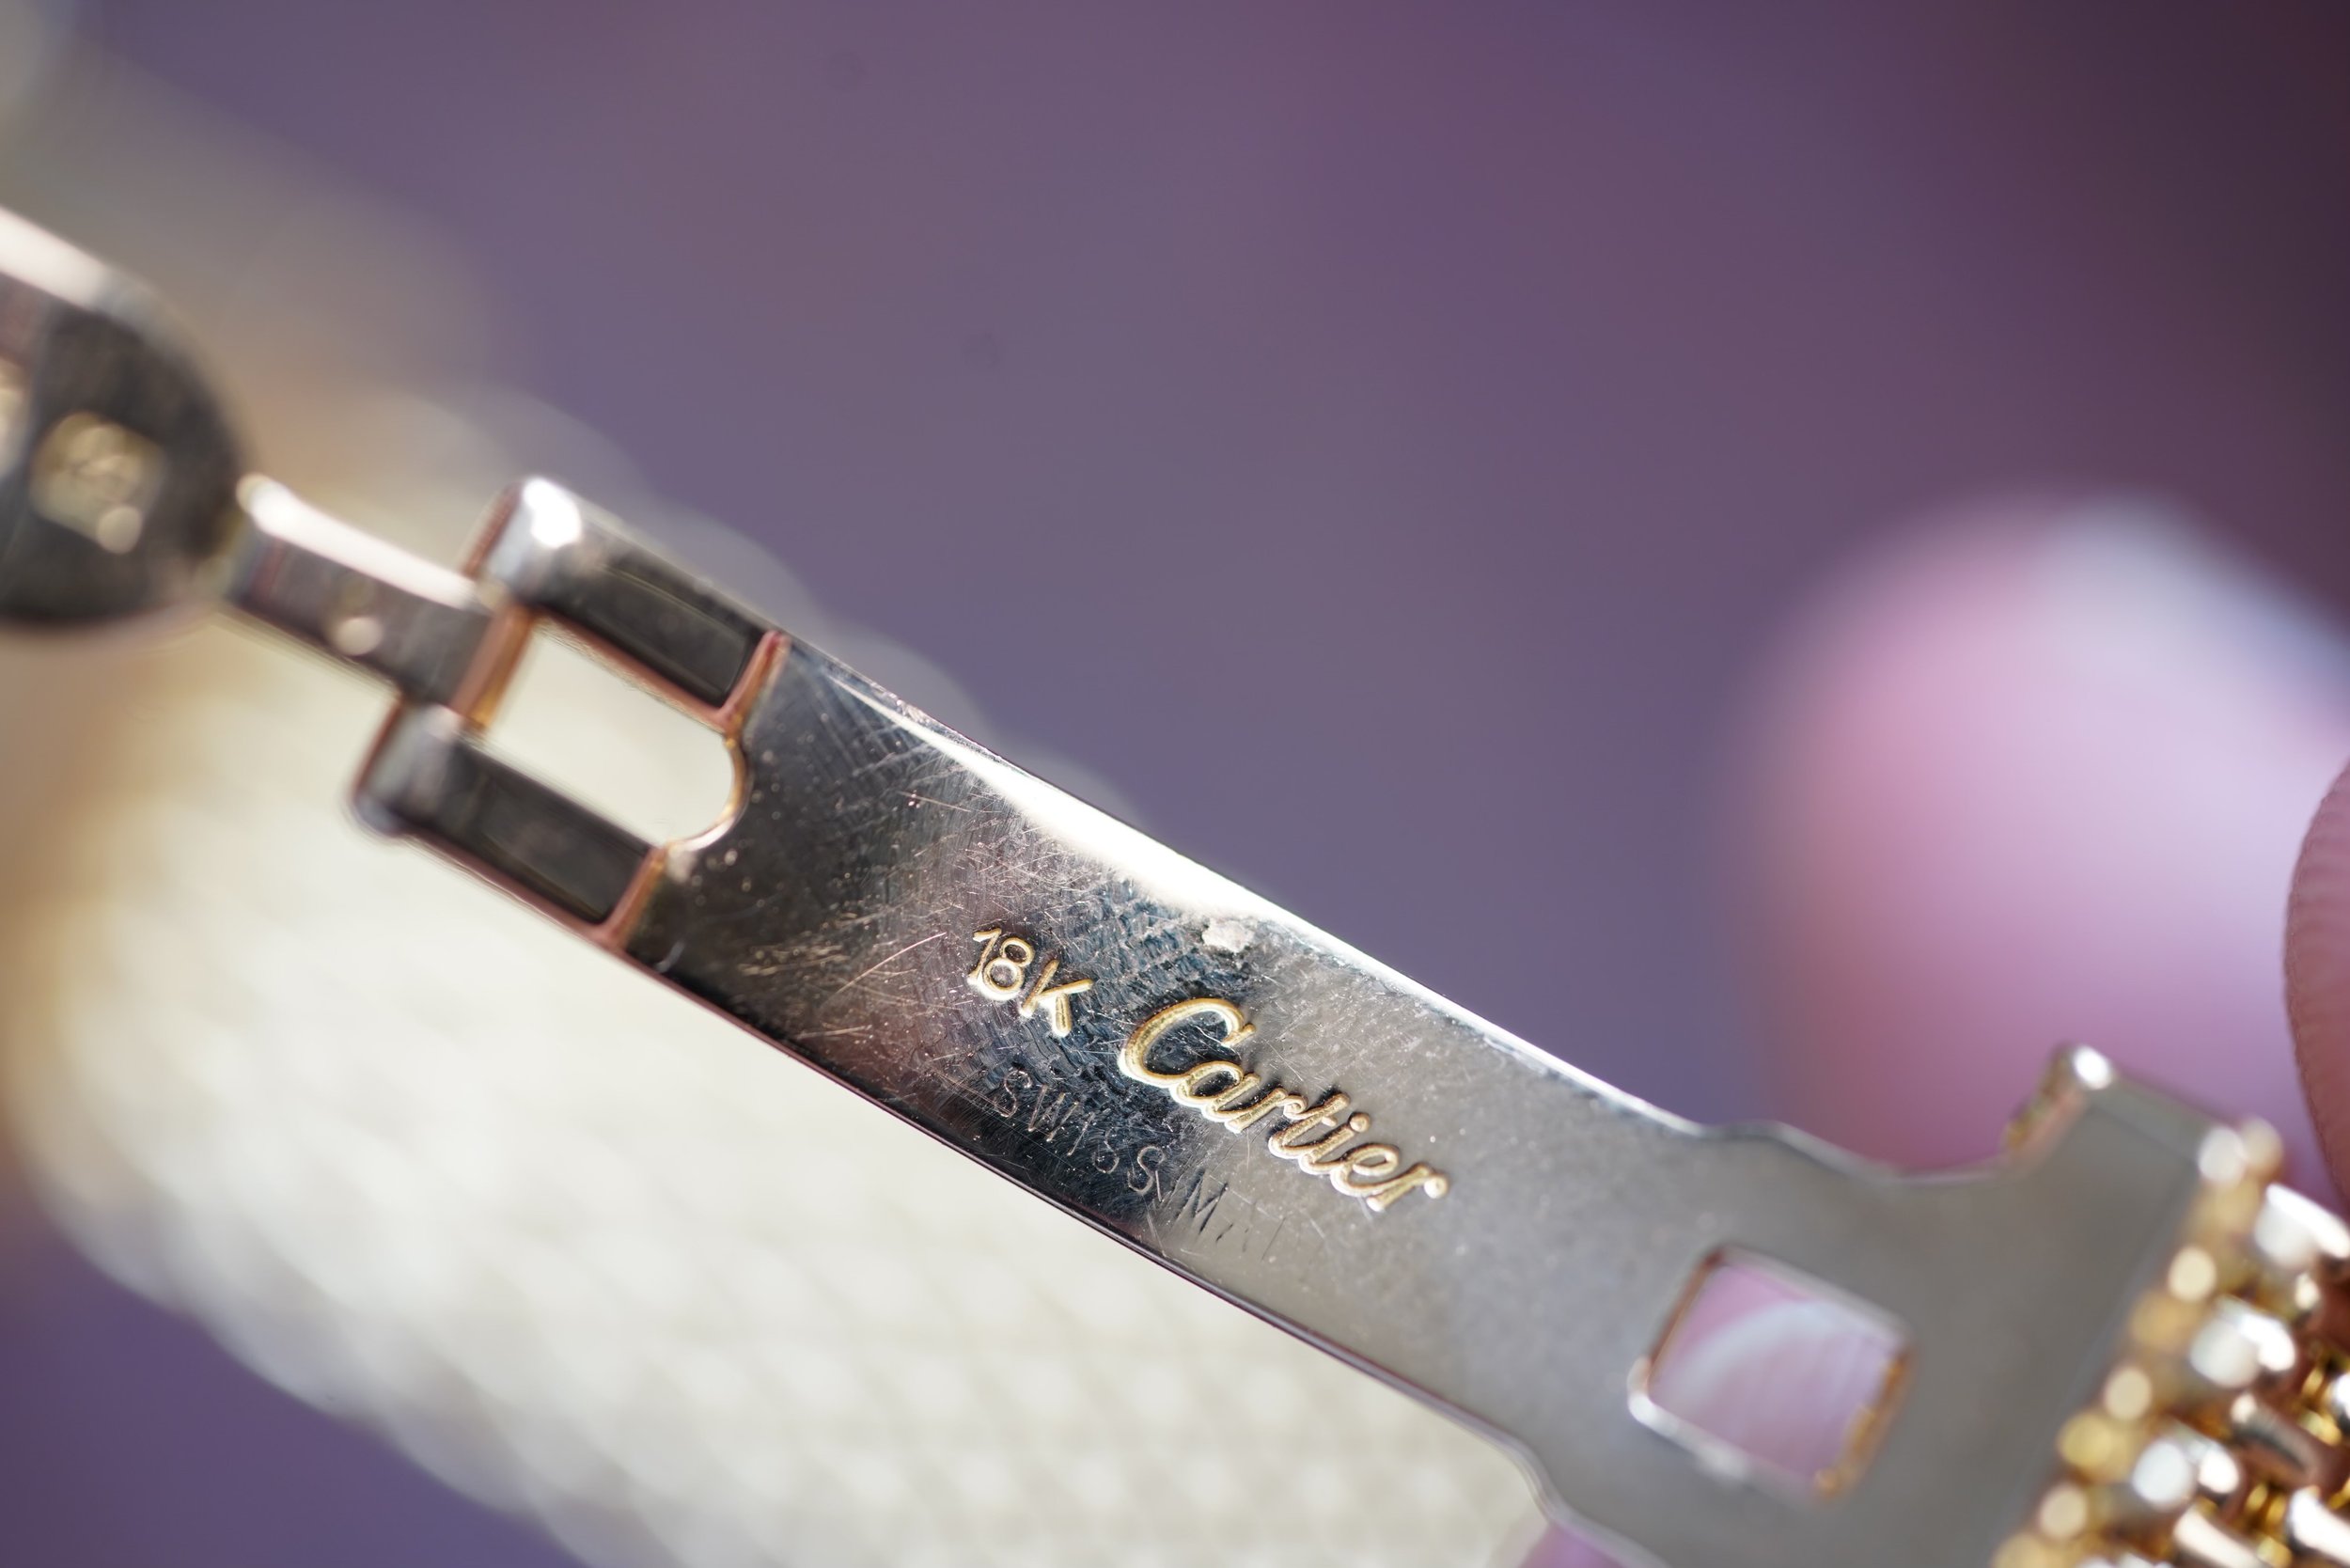 Cartier Tank CPCP with Beads of Rice Bracelet in 18K Gold — Wind Vintage